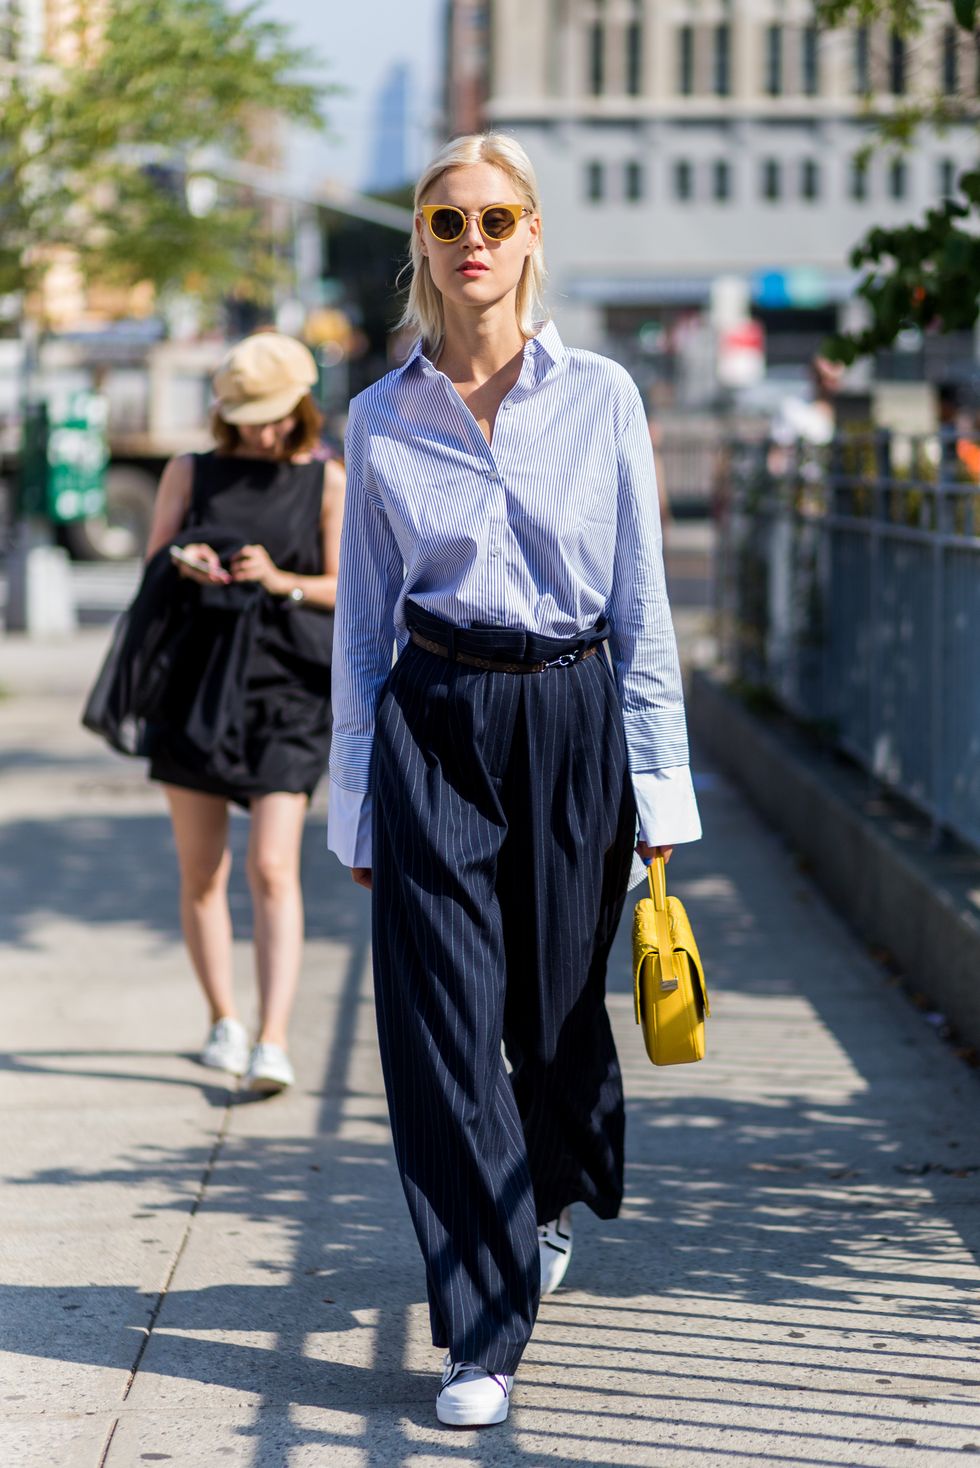 How To Dress For Work In A Heat Wave - Clothes To Wear Even When It's  Boiling Outside